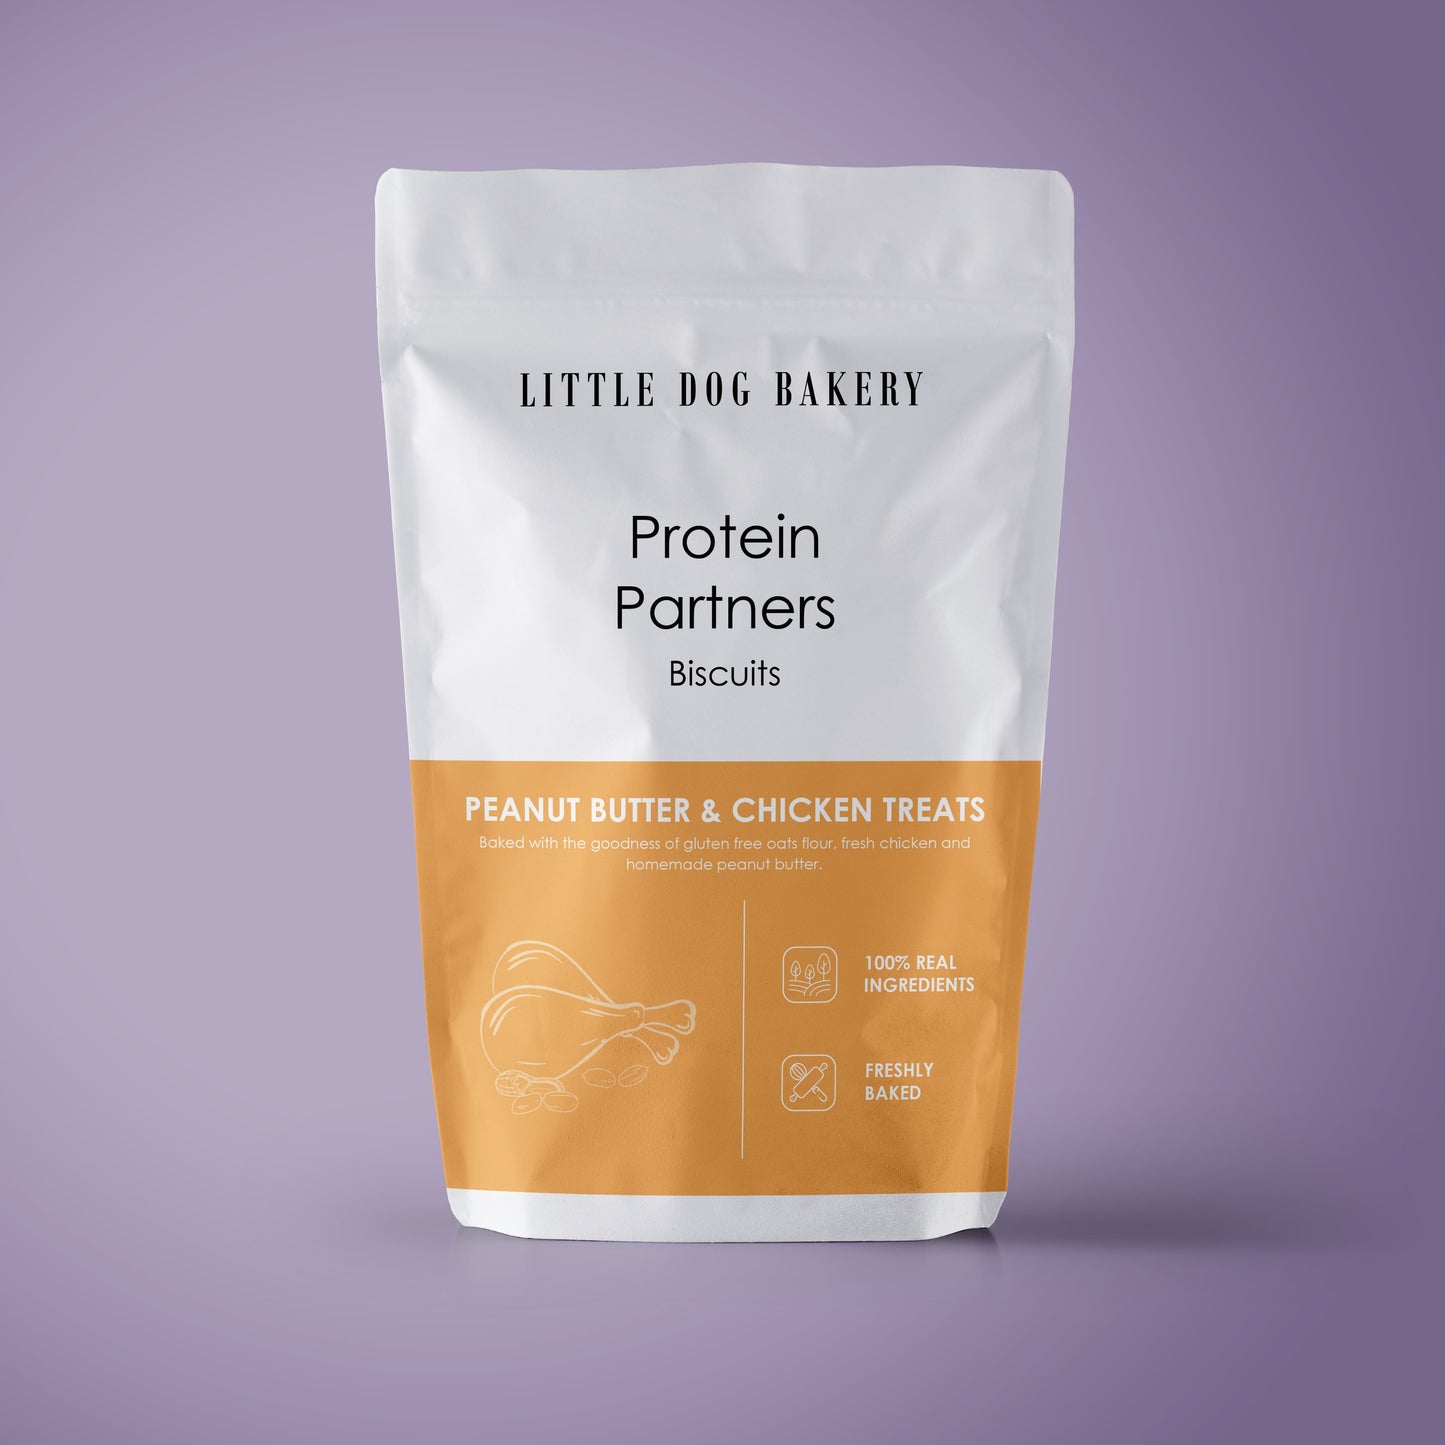 Protein Partners